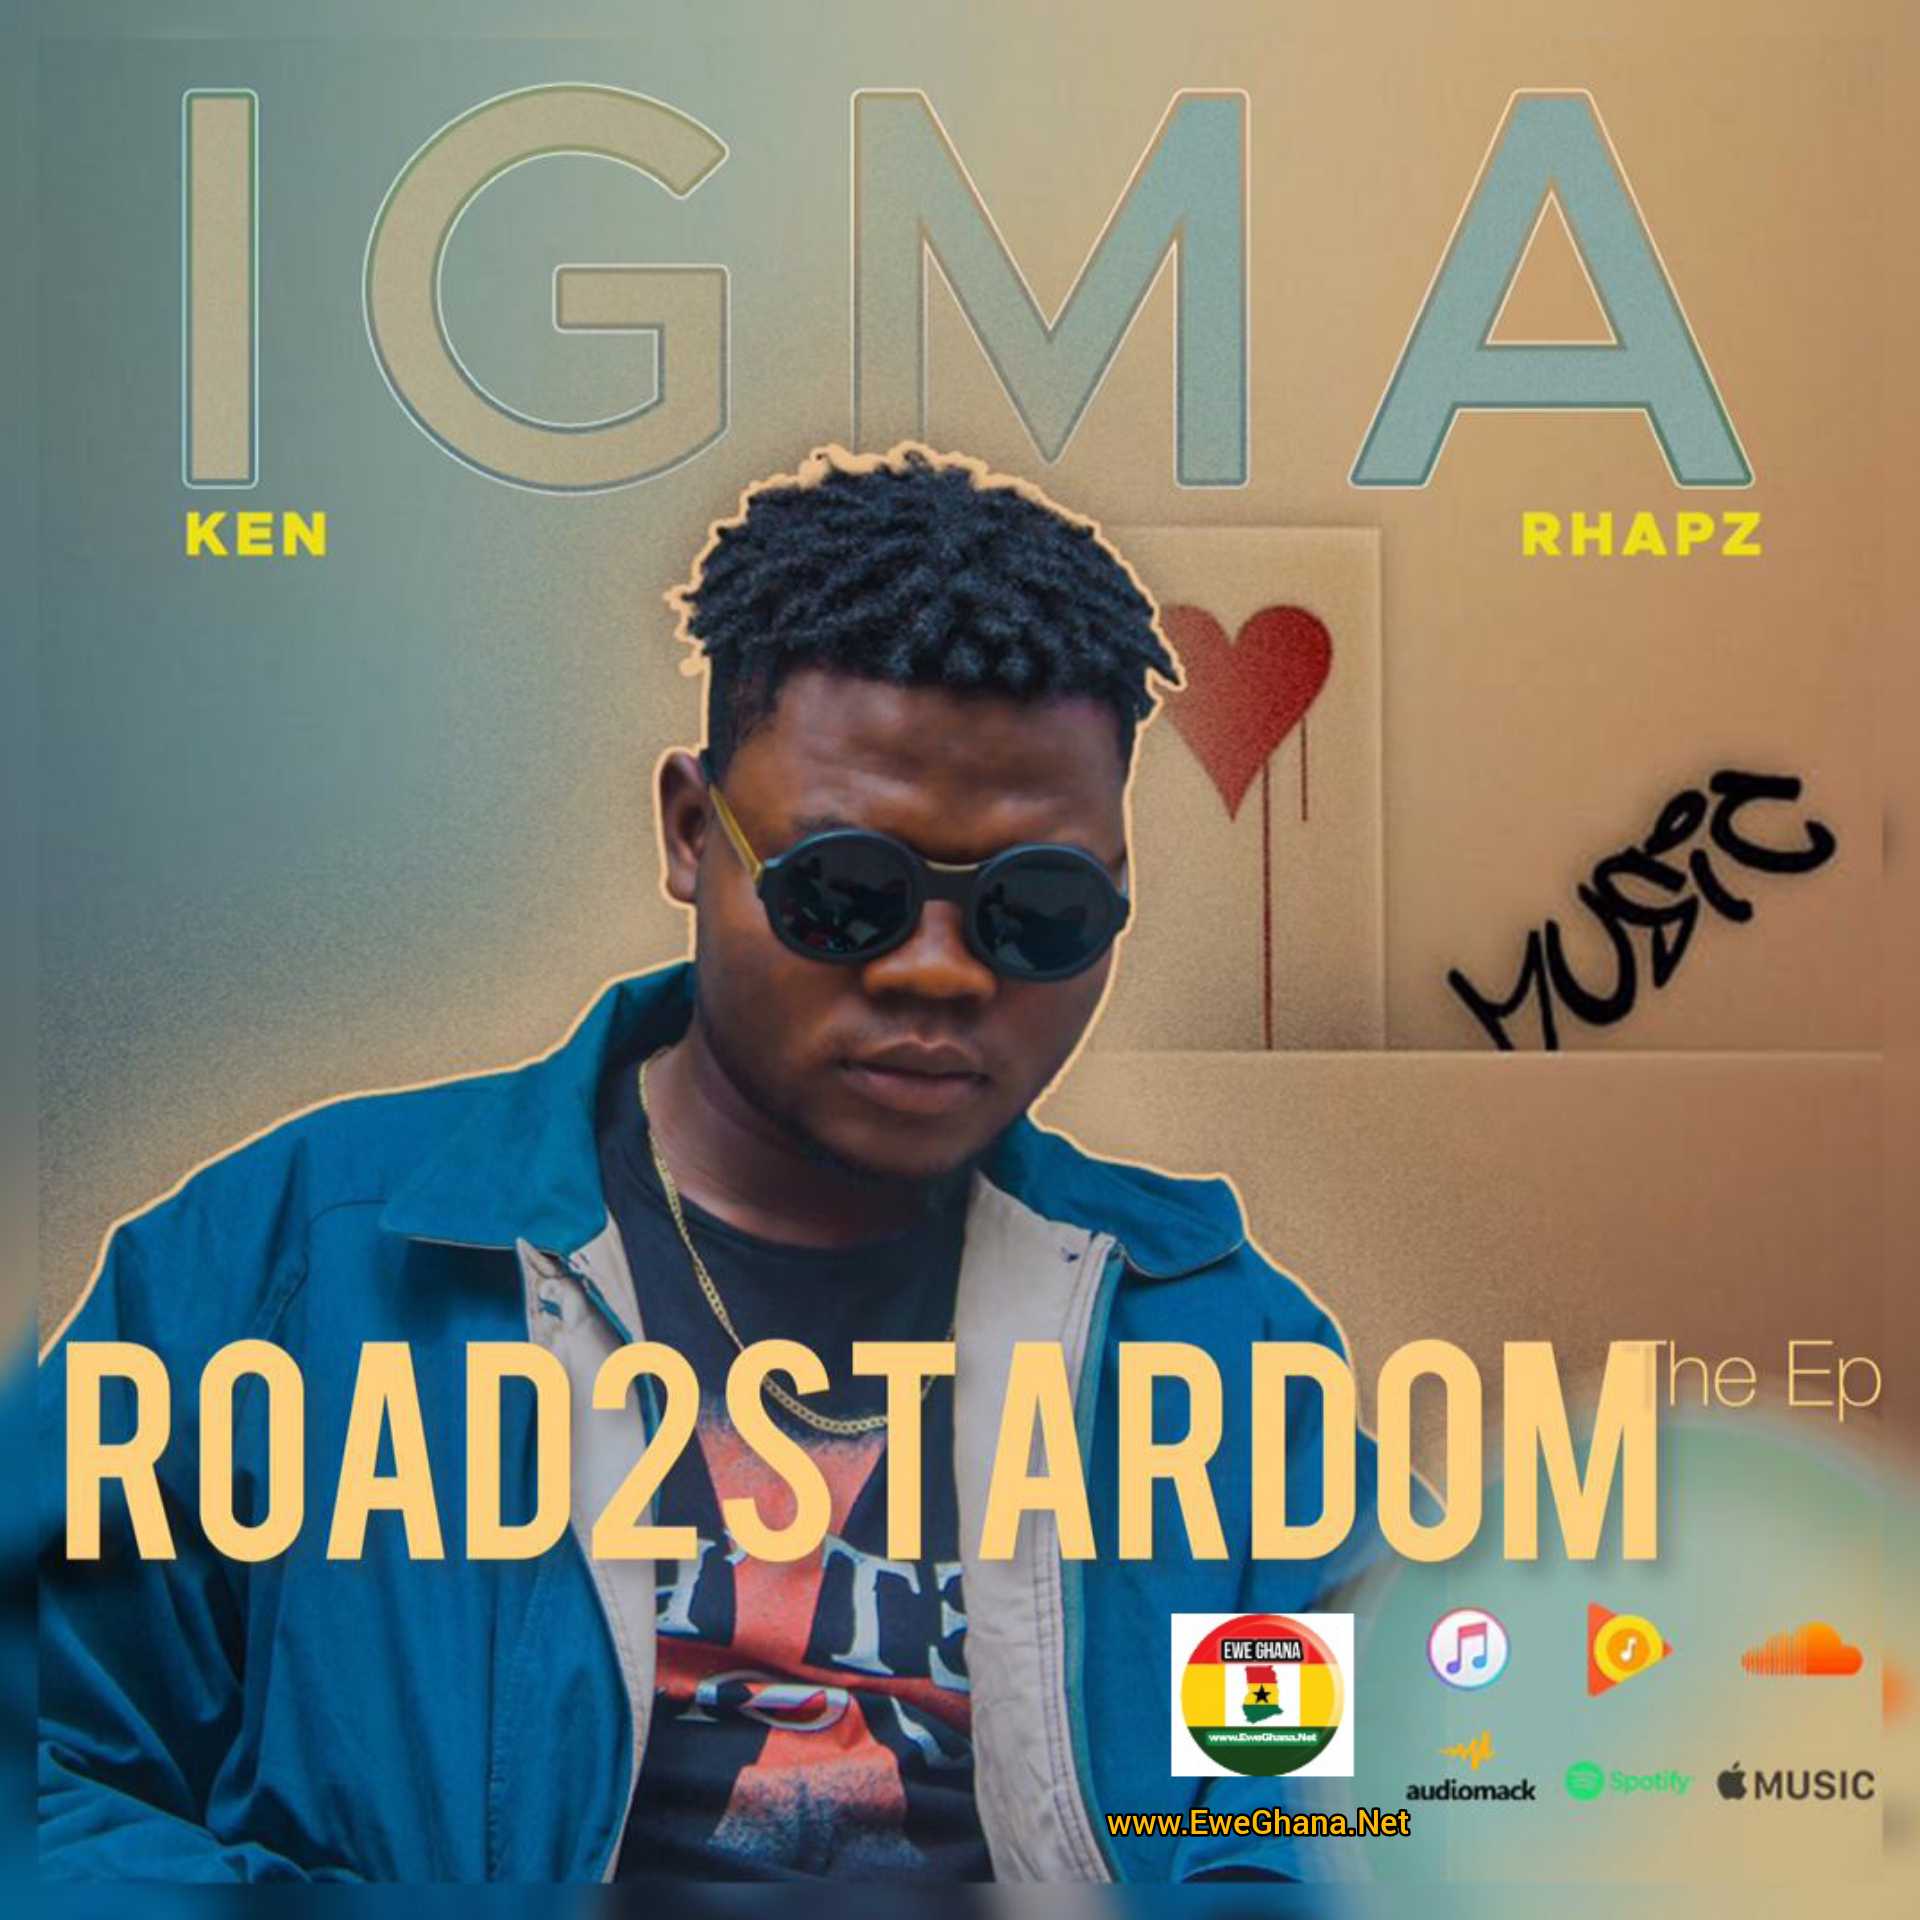 Ghanaians fast rising singer and a rapper “Ken Rhapz" from Tema drop a disturbing EP which he titled Road2stardom.